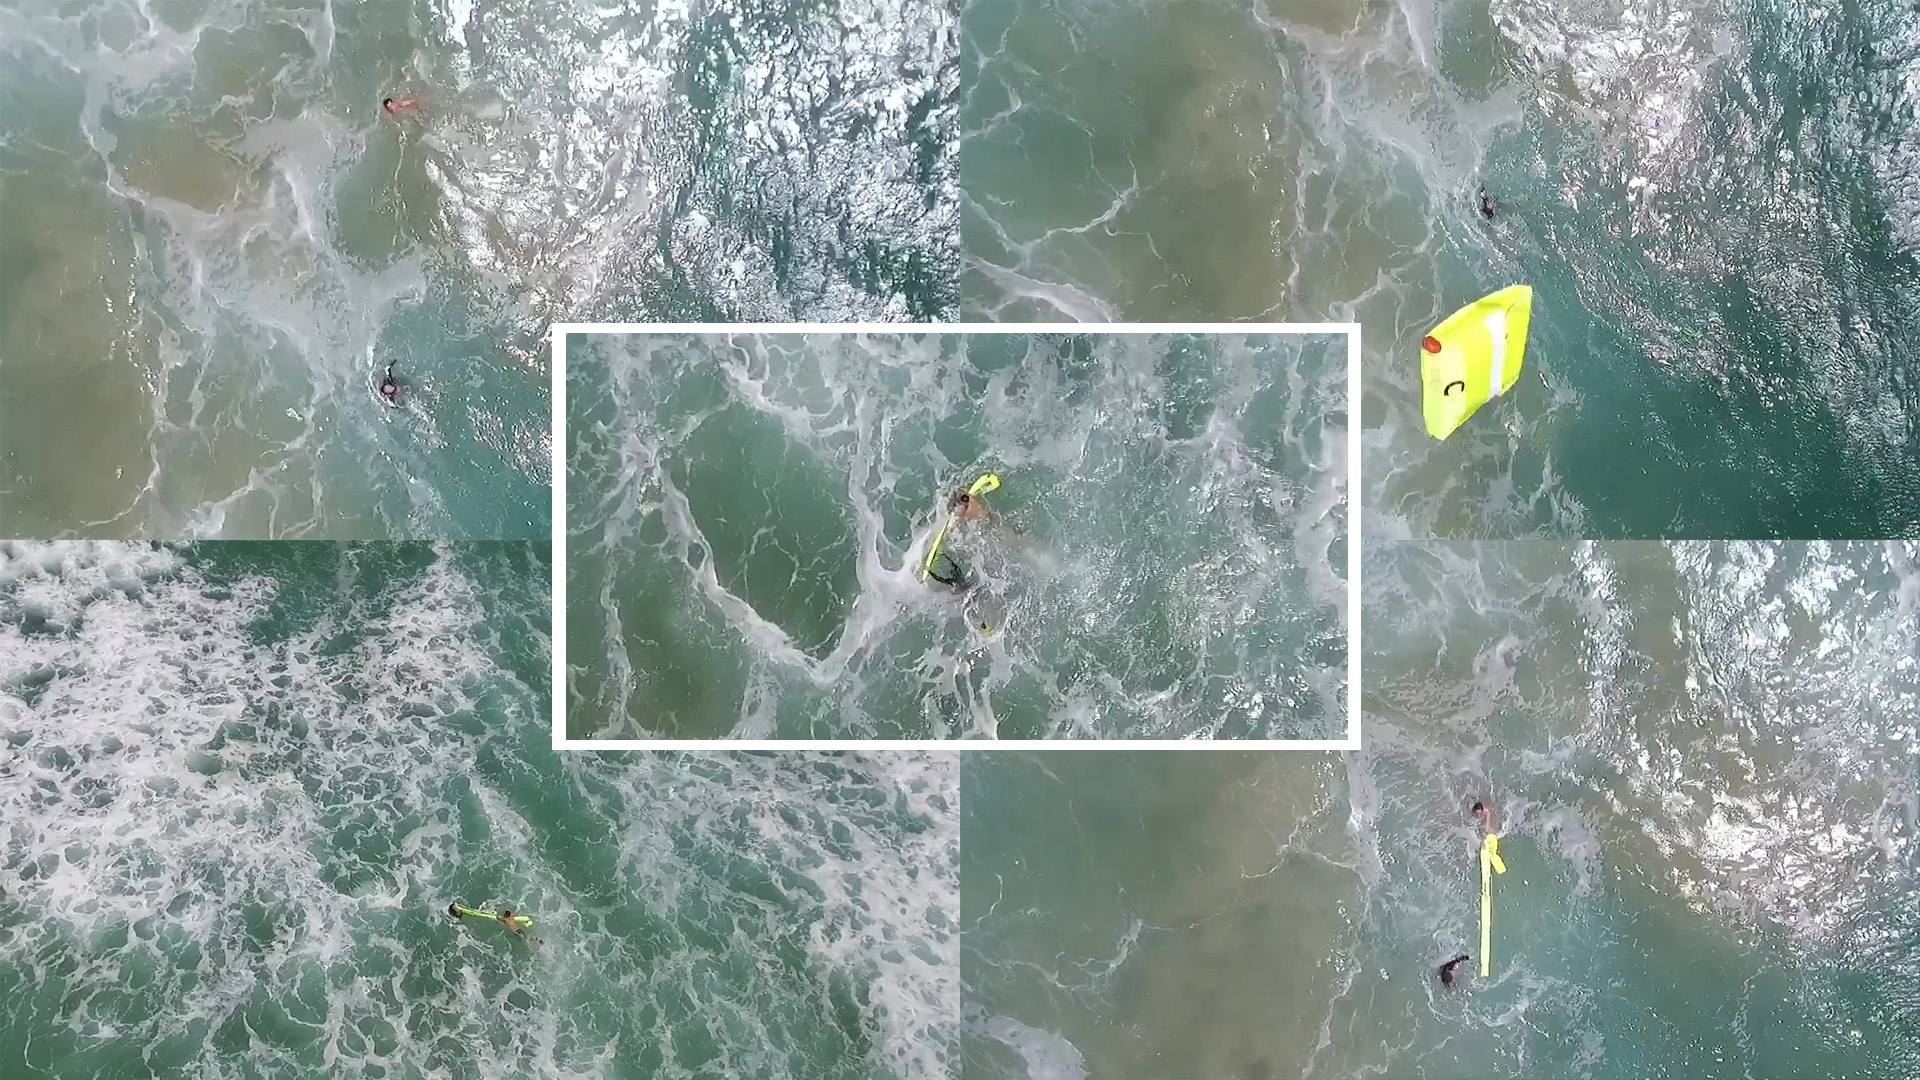 This sequence of images from a video taken Jan. 18 by the Westpac Little Ripper documents the rescue of two teens who were caught in dangerous surf far from shore, and assisted by a floatation device dropped from the drone. Photos from video courtesy of Westpac Little Ripper. 